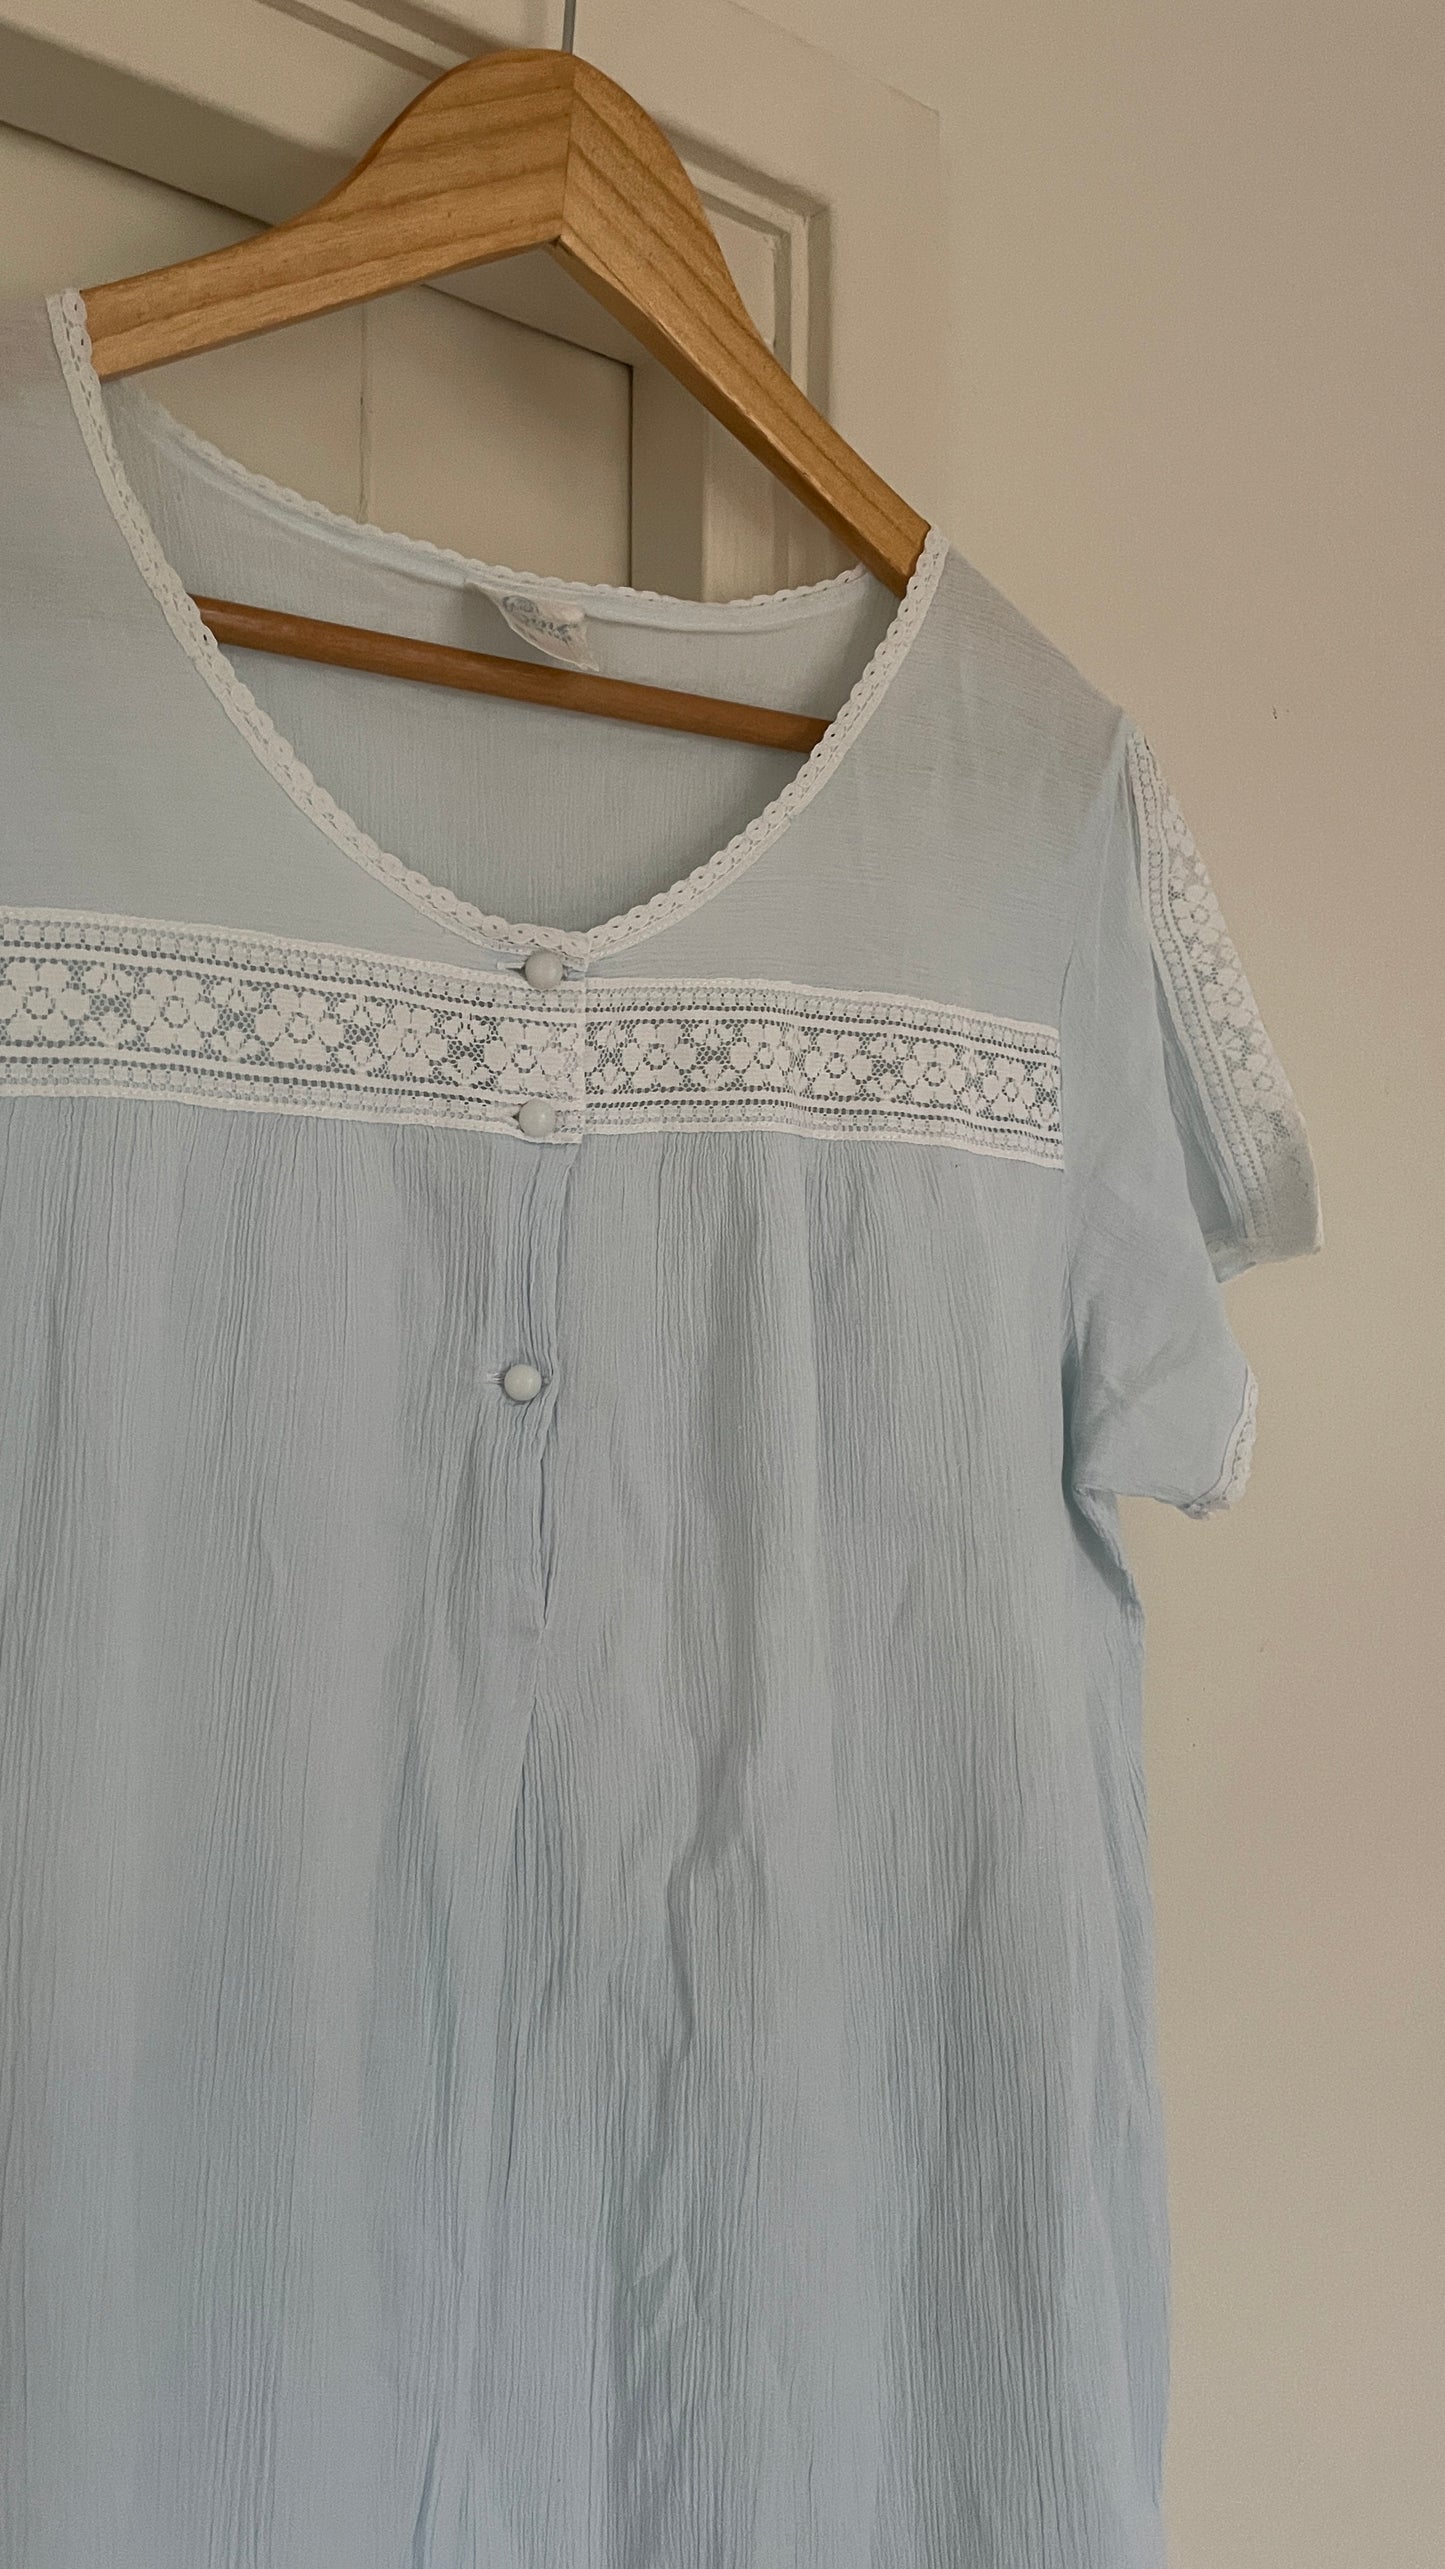 Sky blue nightgown